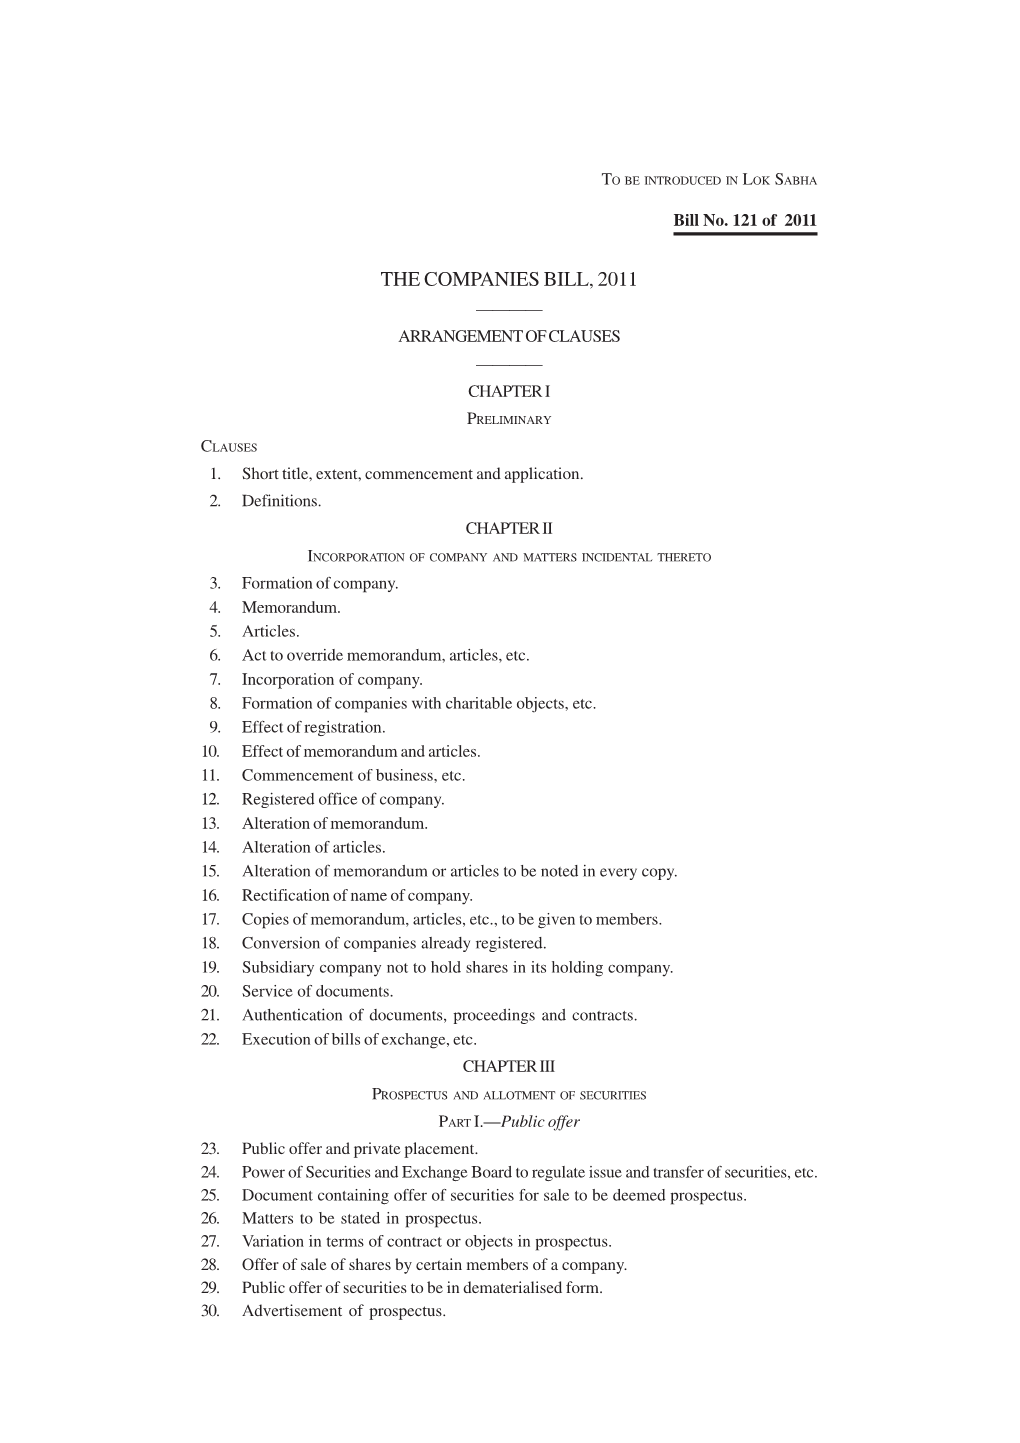 The Companies Bill, 2011 As Presented to the Parliament